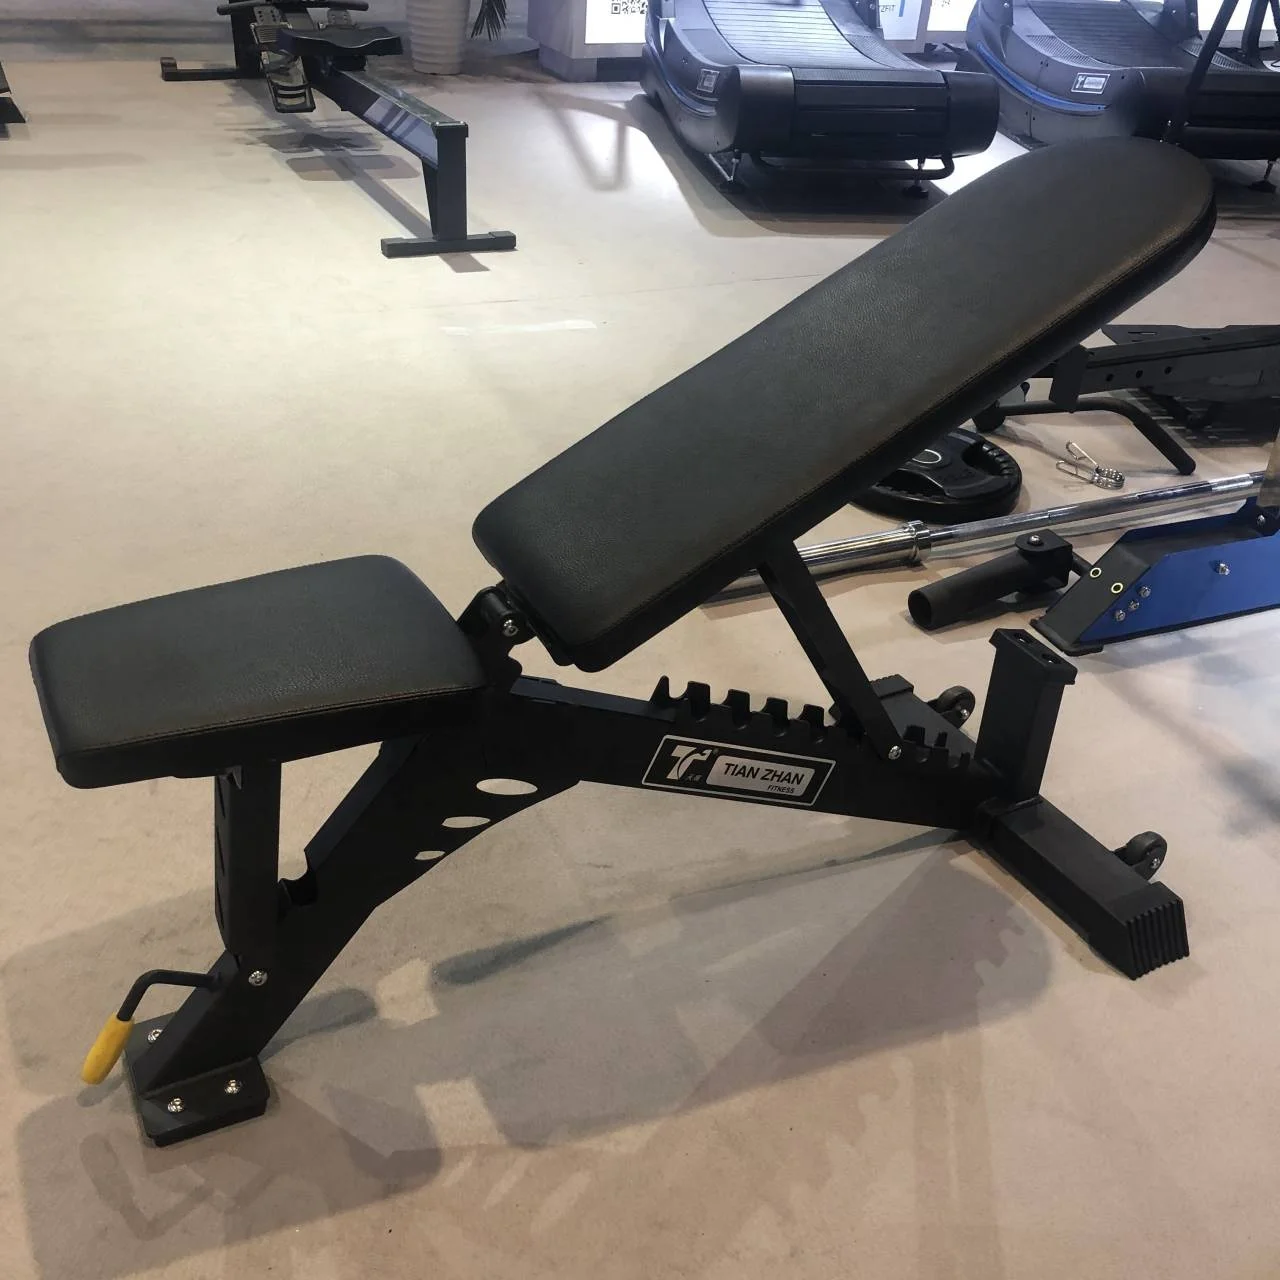 

Hot sale China commercial exercise bench home gym equipment adjustable weight bench, Customed